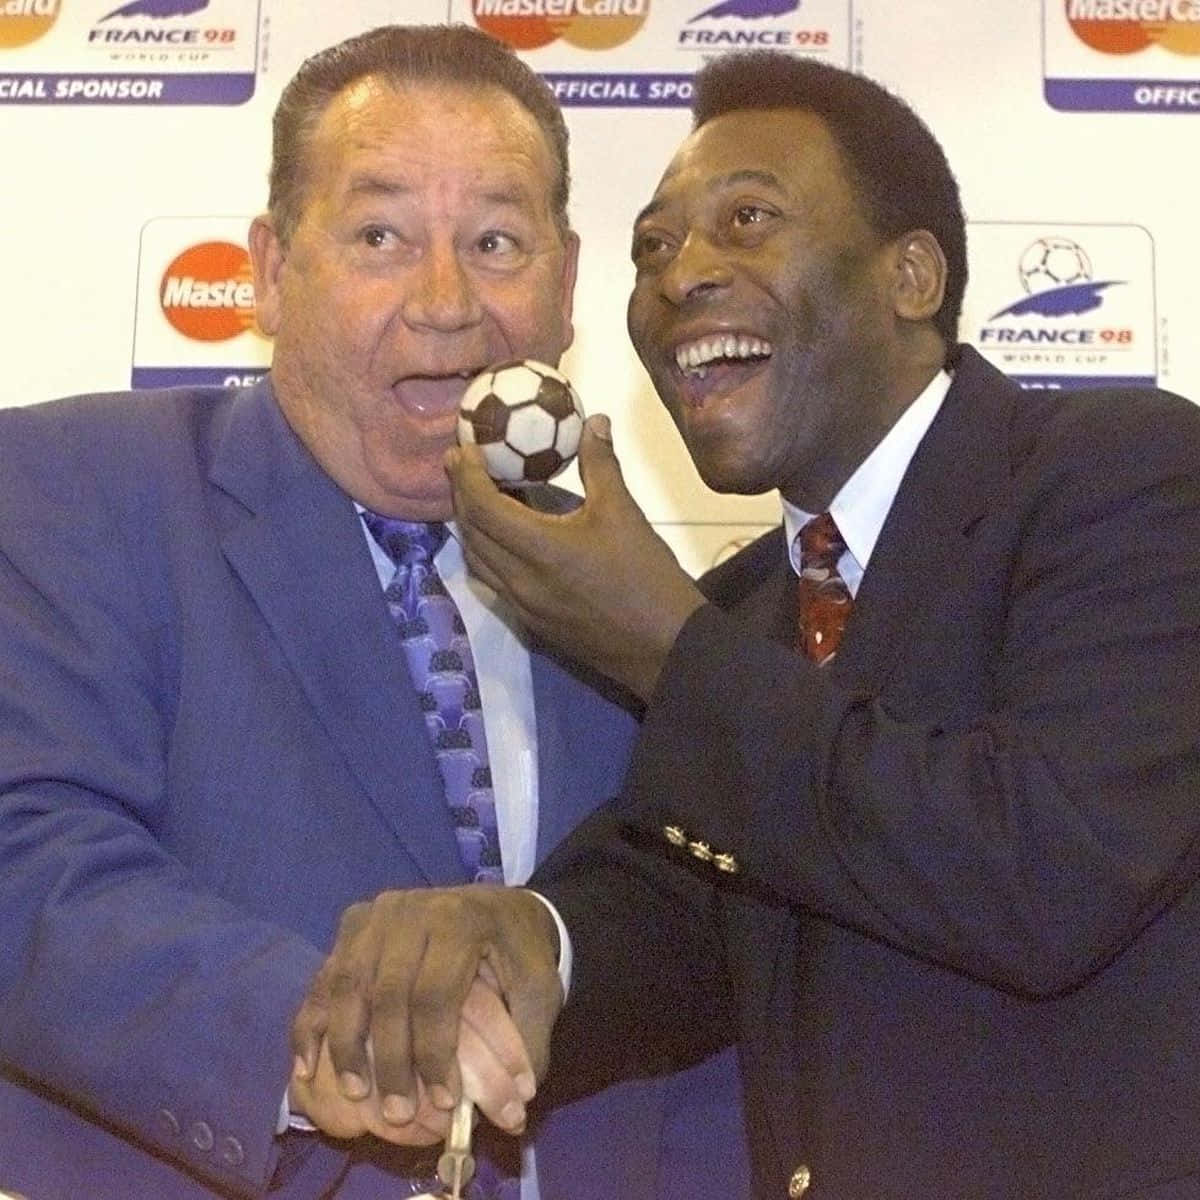 Brazilian Football Player Pelé And French Football Player Just Fontaine Wallpaper